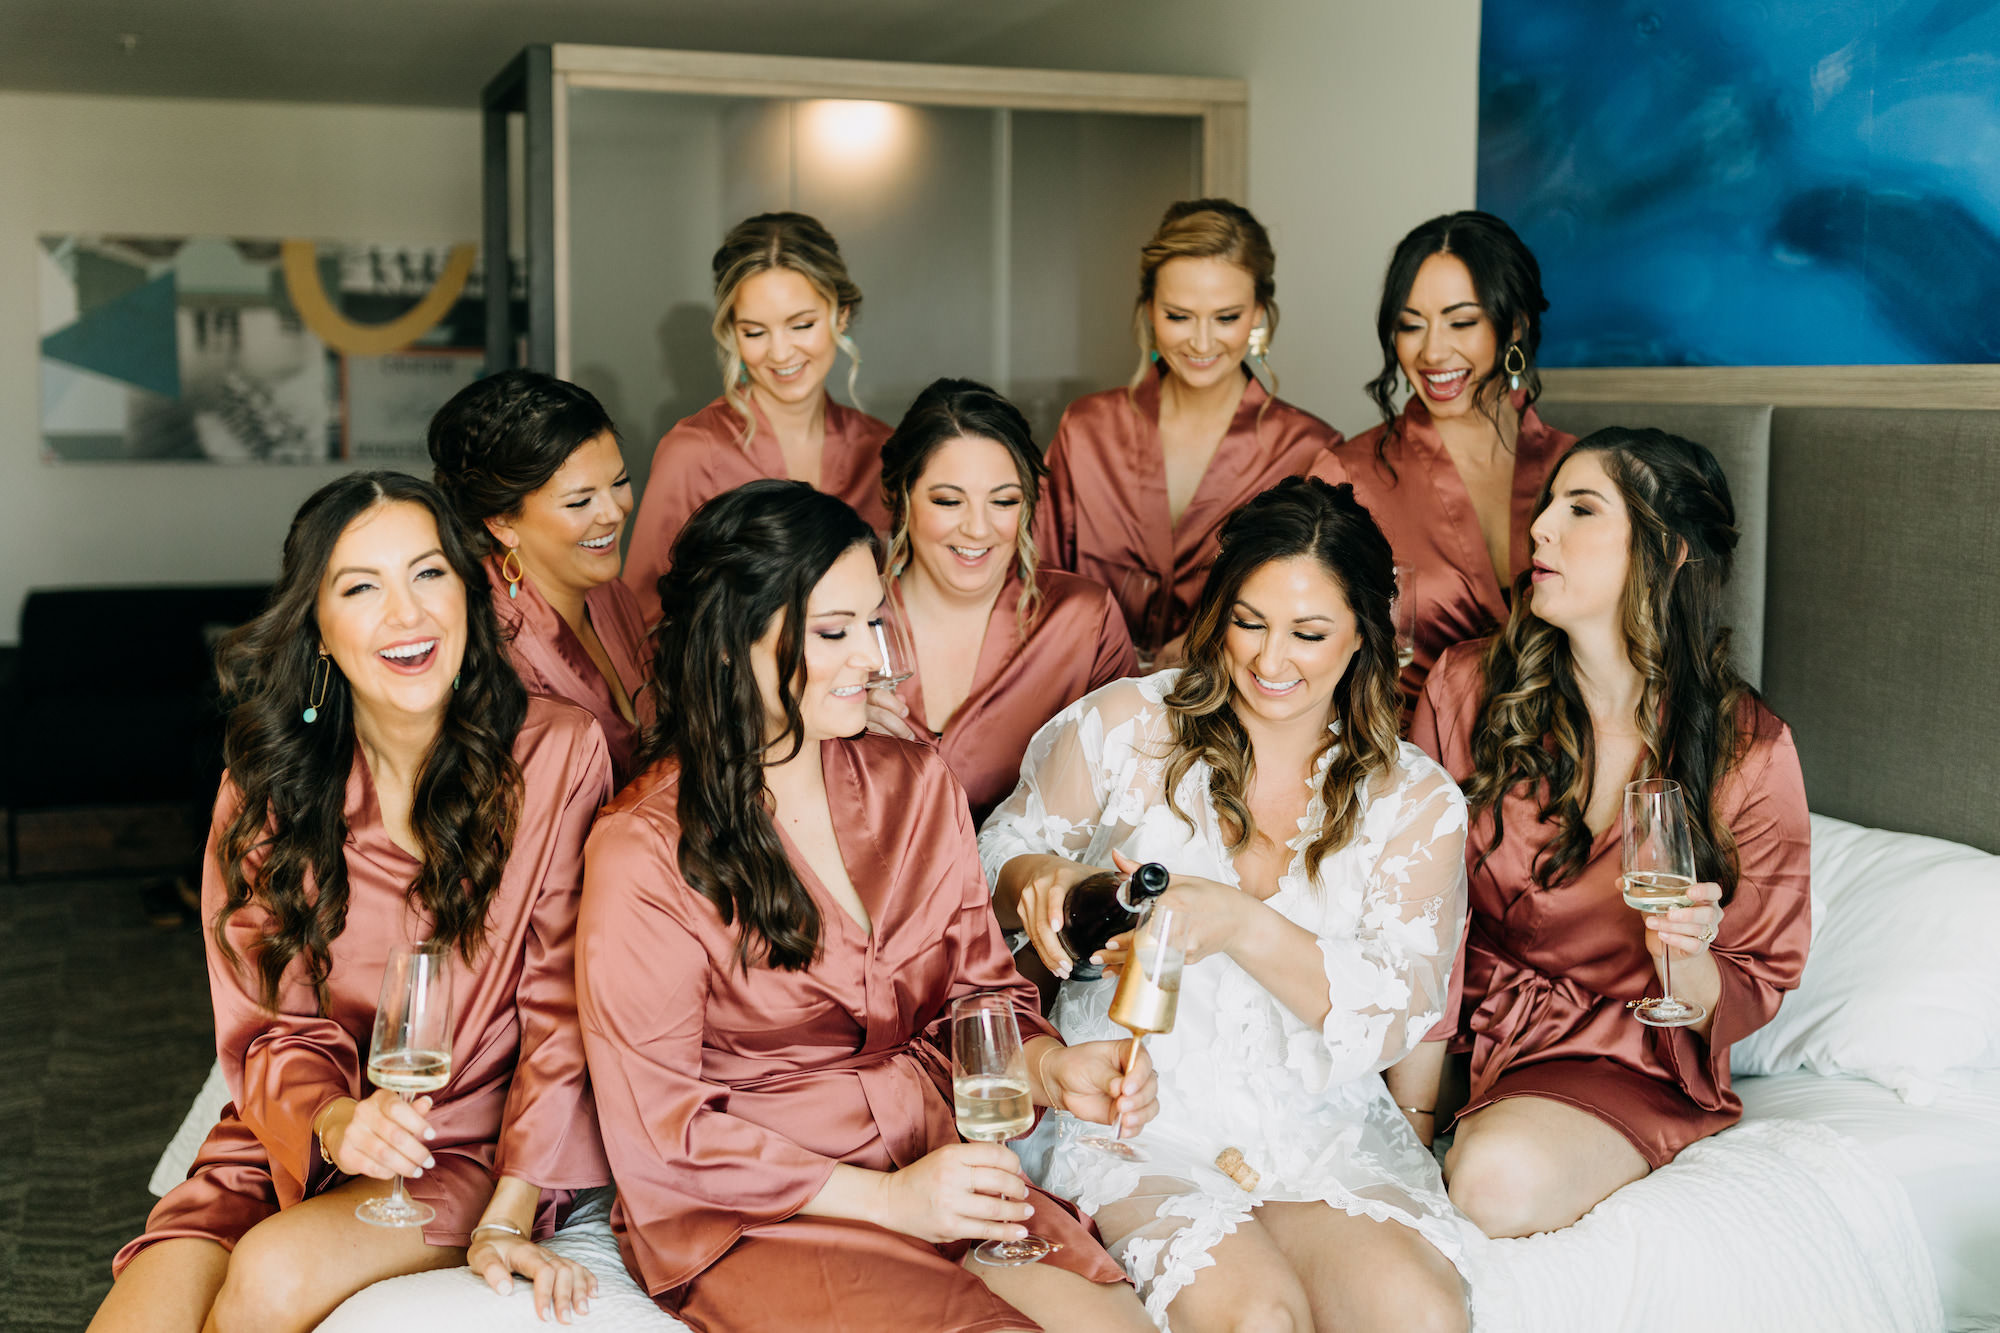 Wedding Bridal Party Champagne Celebration with Matching Dusty Rose Bridesmaids Robes